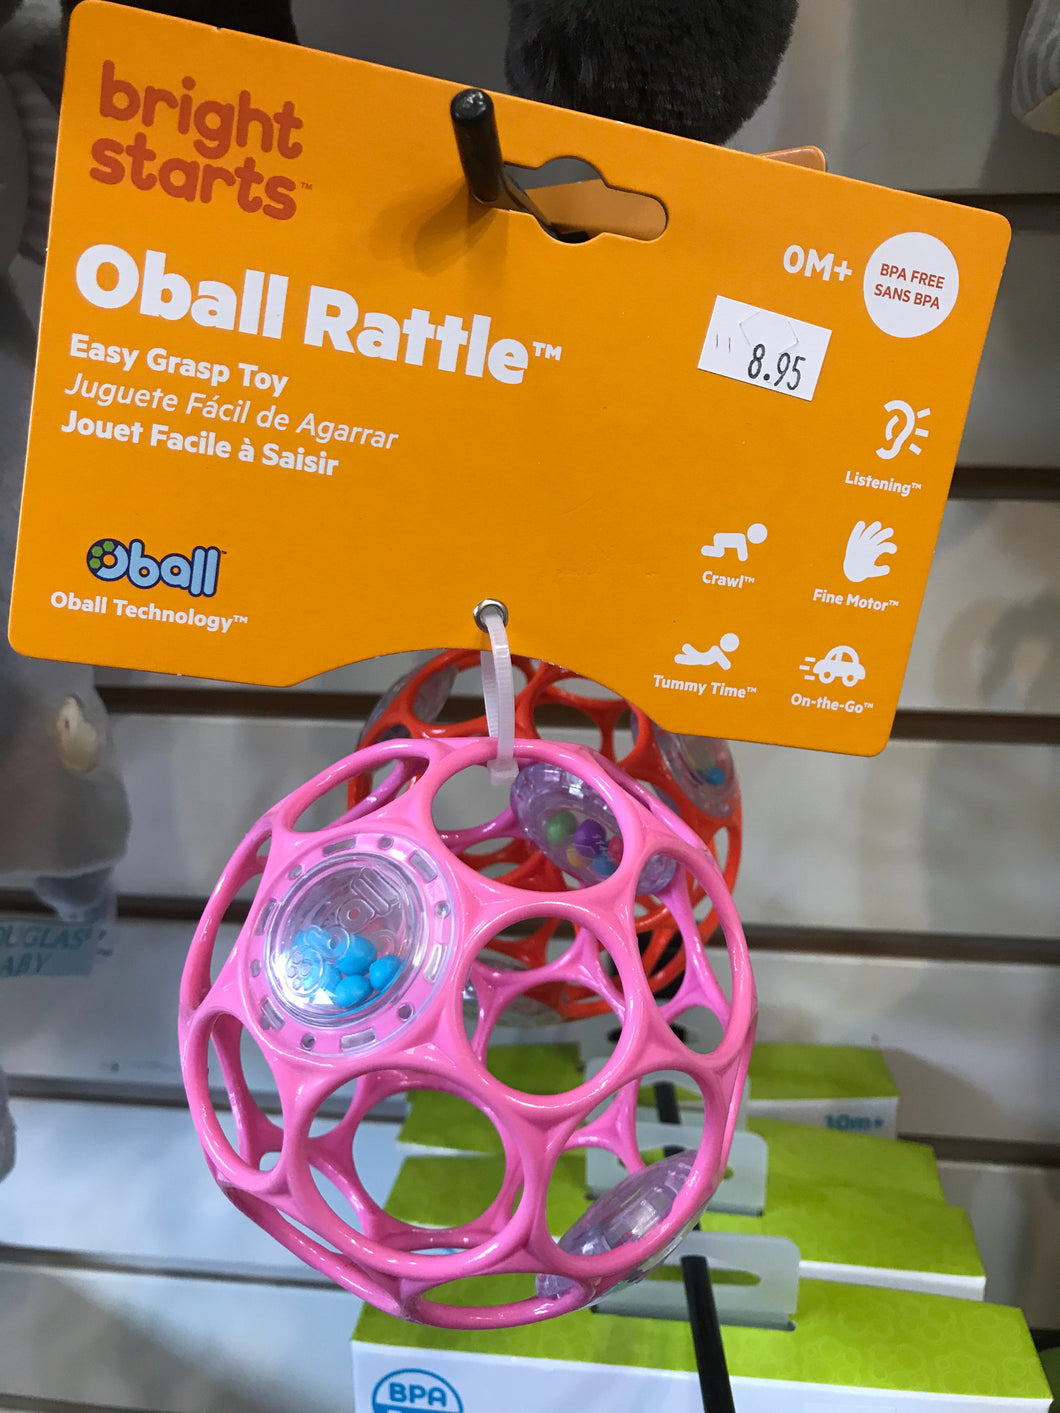 Bright Starts - Oball Rattle (assorted color)